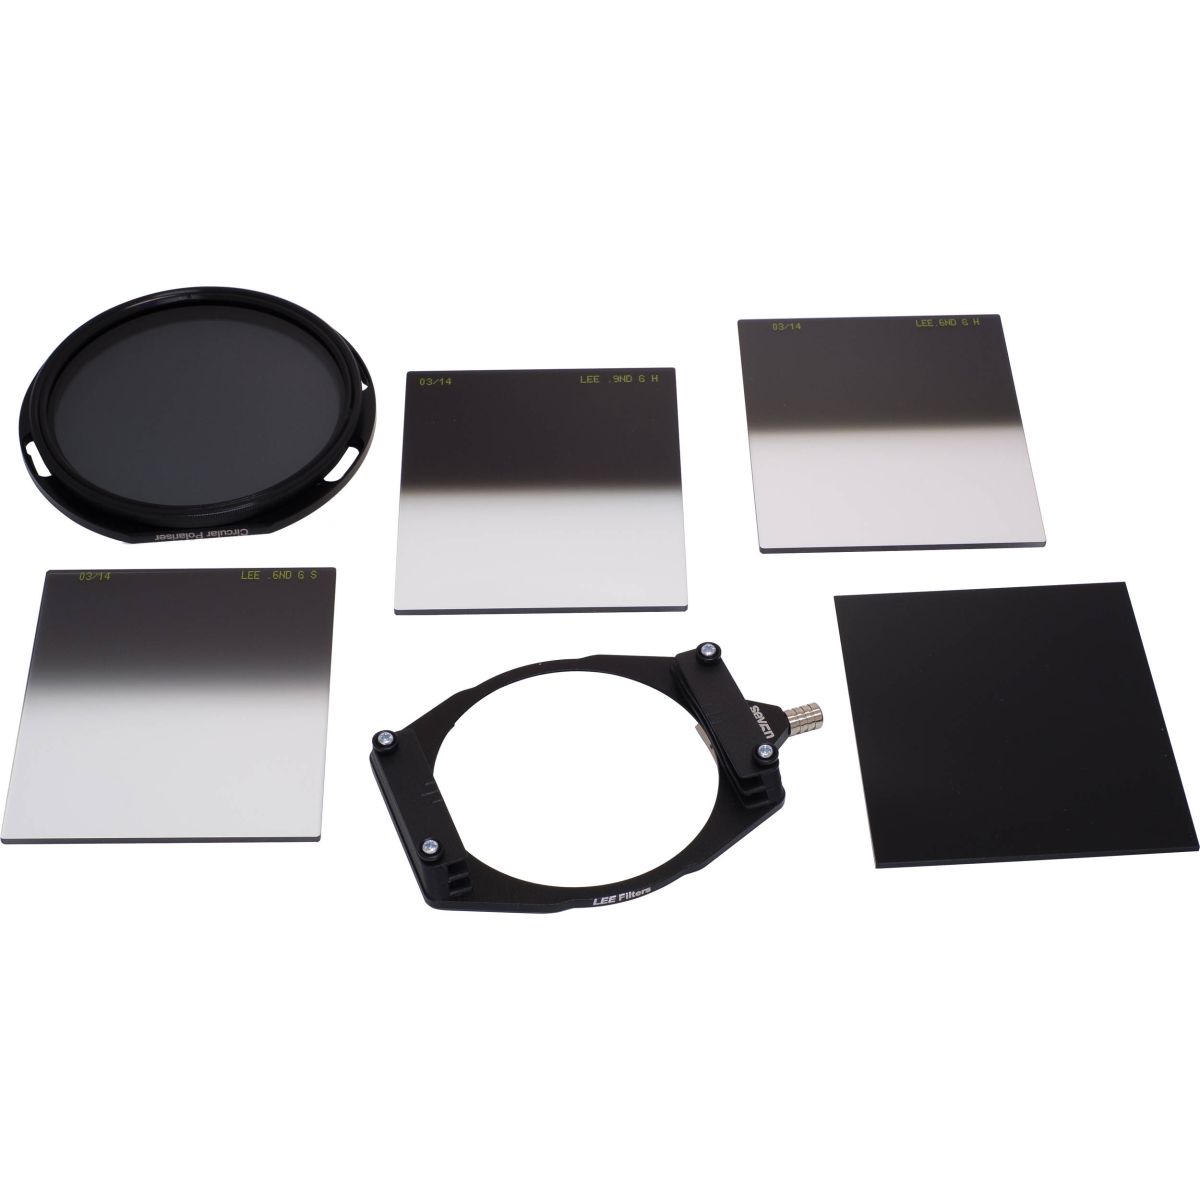 LEE Filters Seven5 Deluxe Kit *A+*